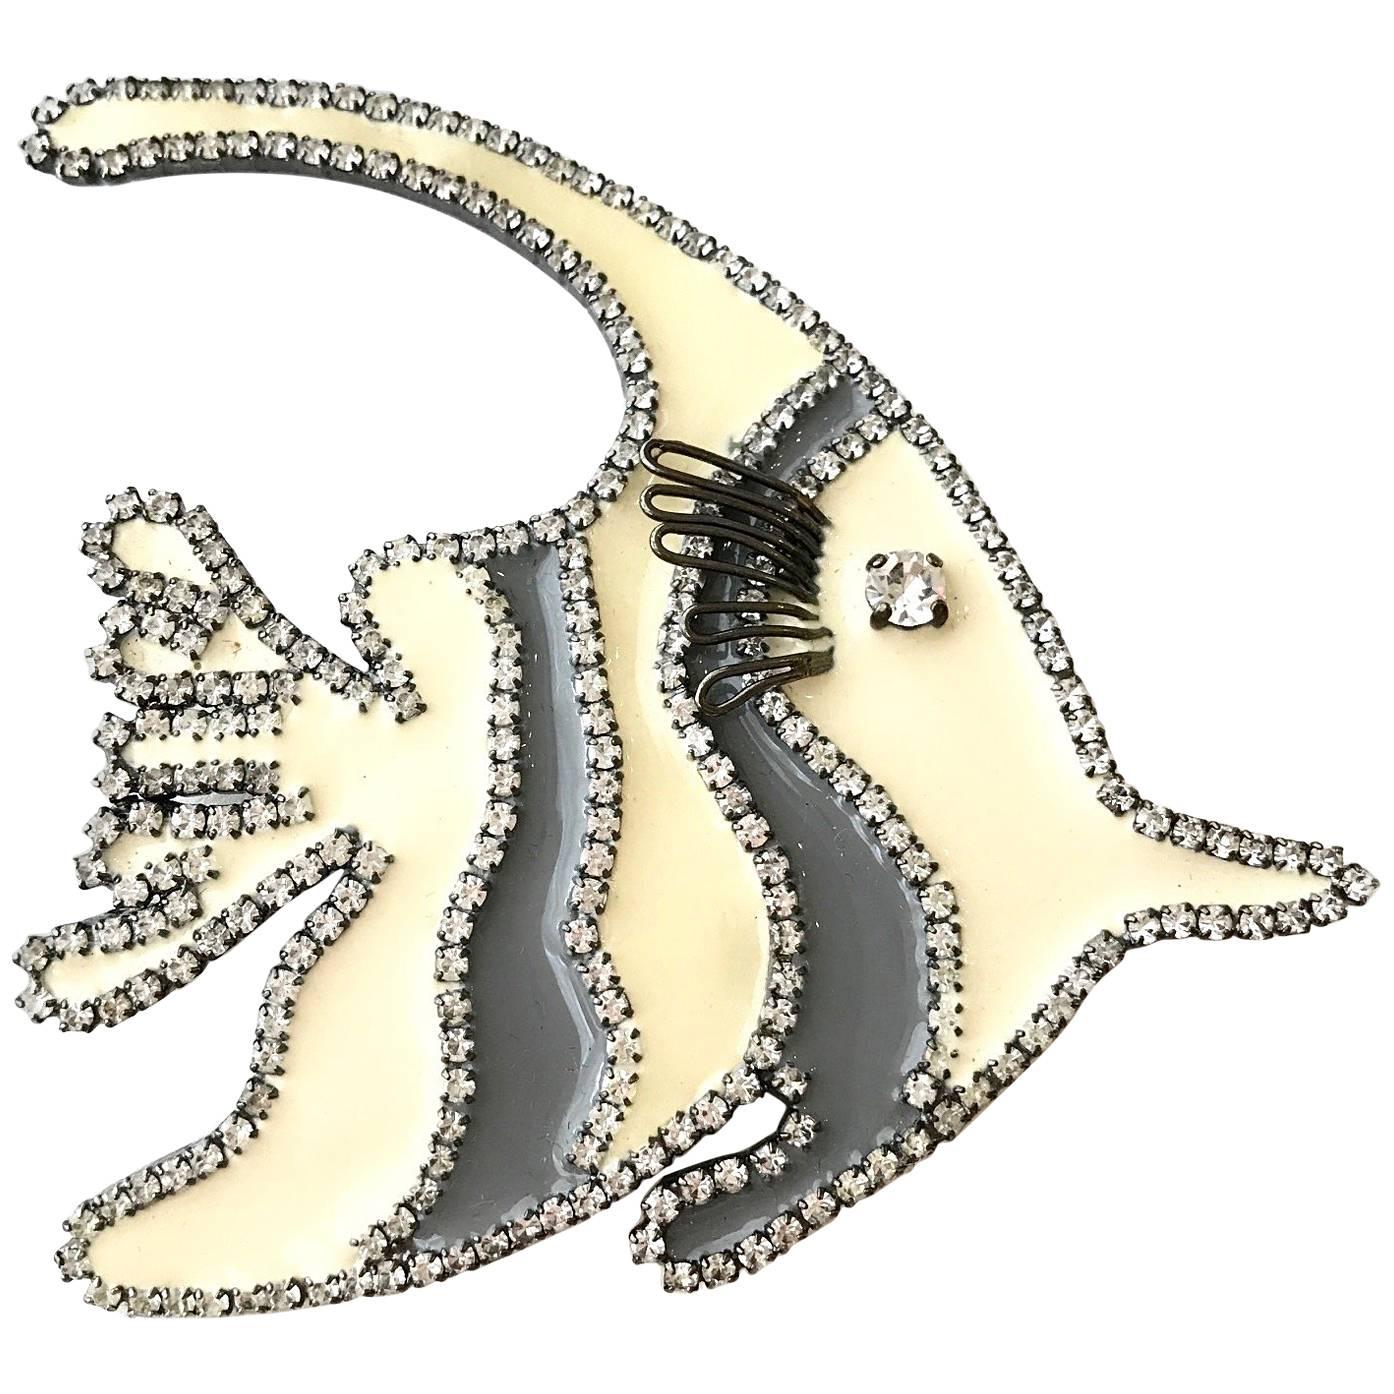 1980s GIORGIO ARMANI Grey and Creme Large Fish Brooch Pin with Rhinestones For Sale